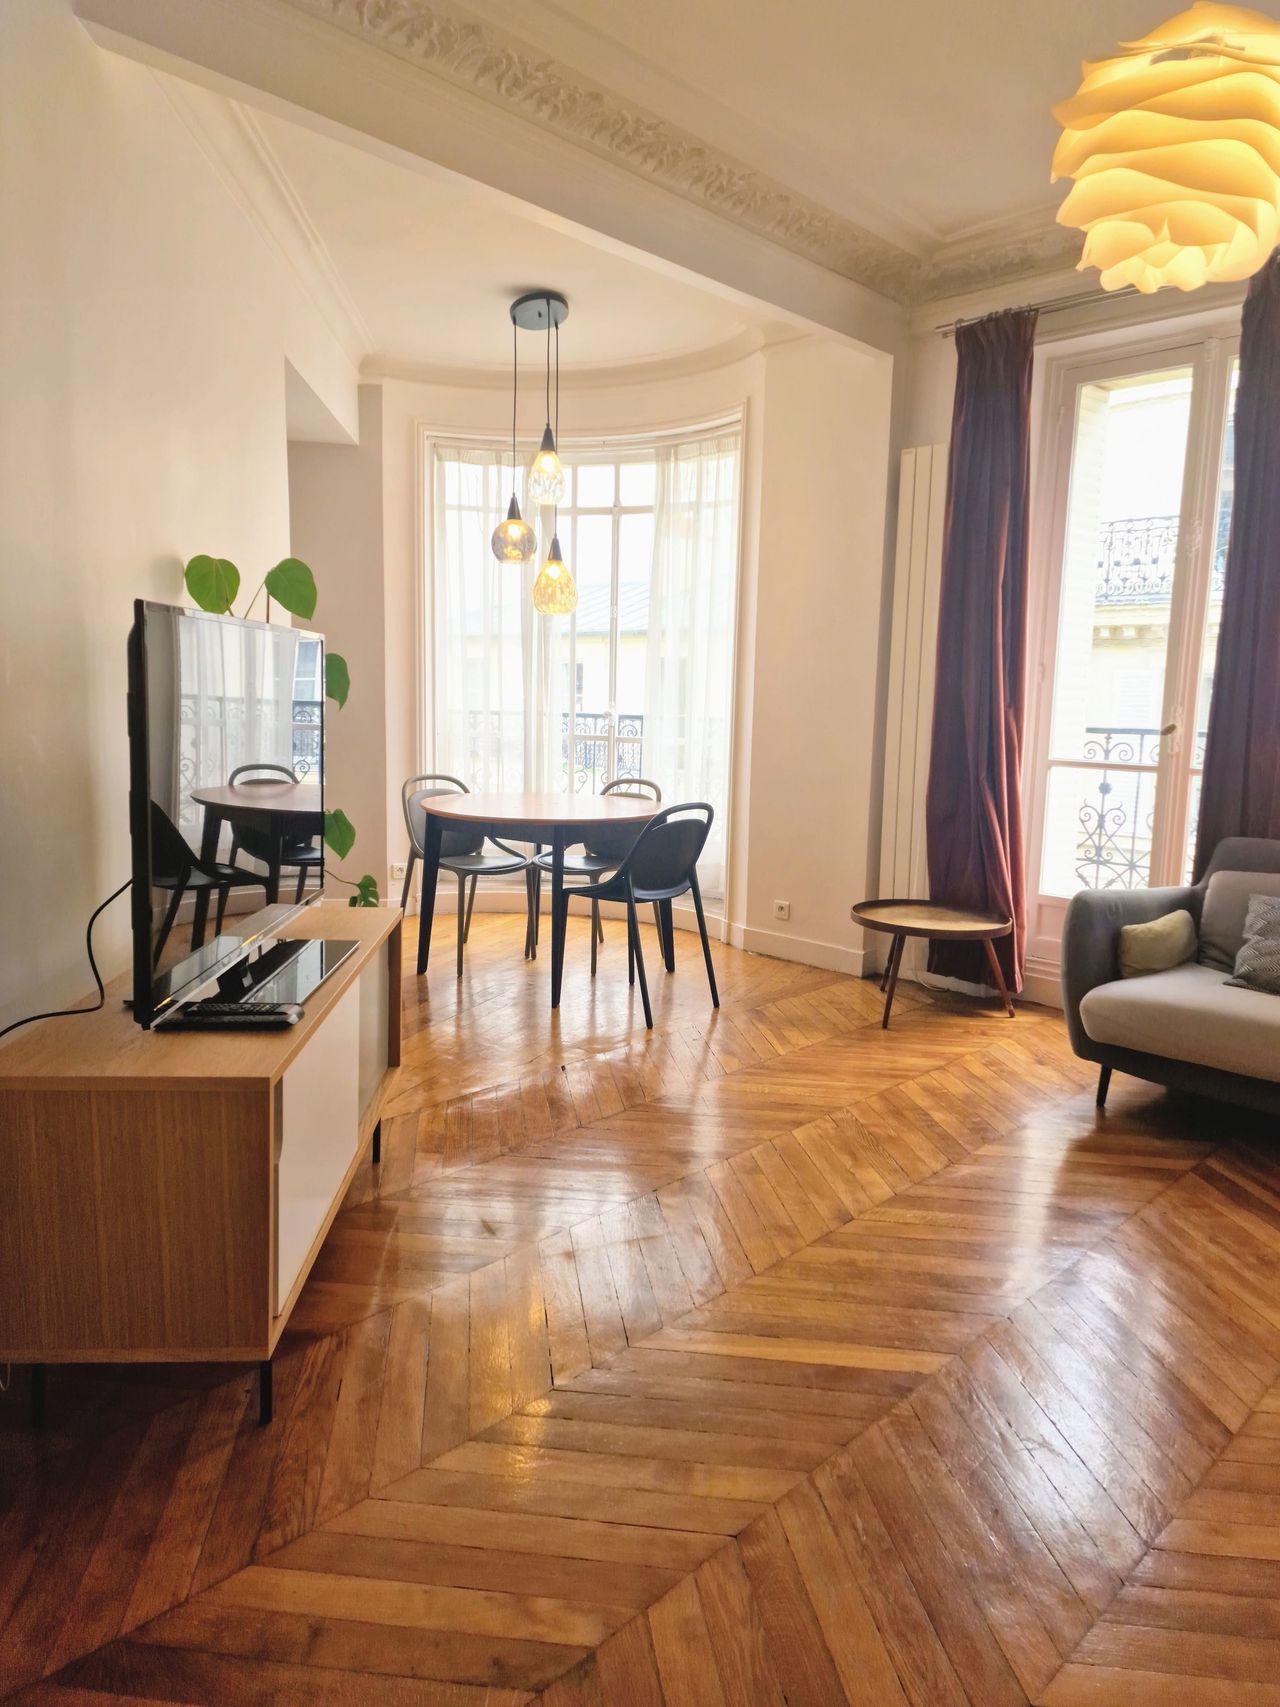 Upscale flat just a short walk from the Arc de Triomphe